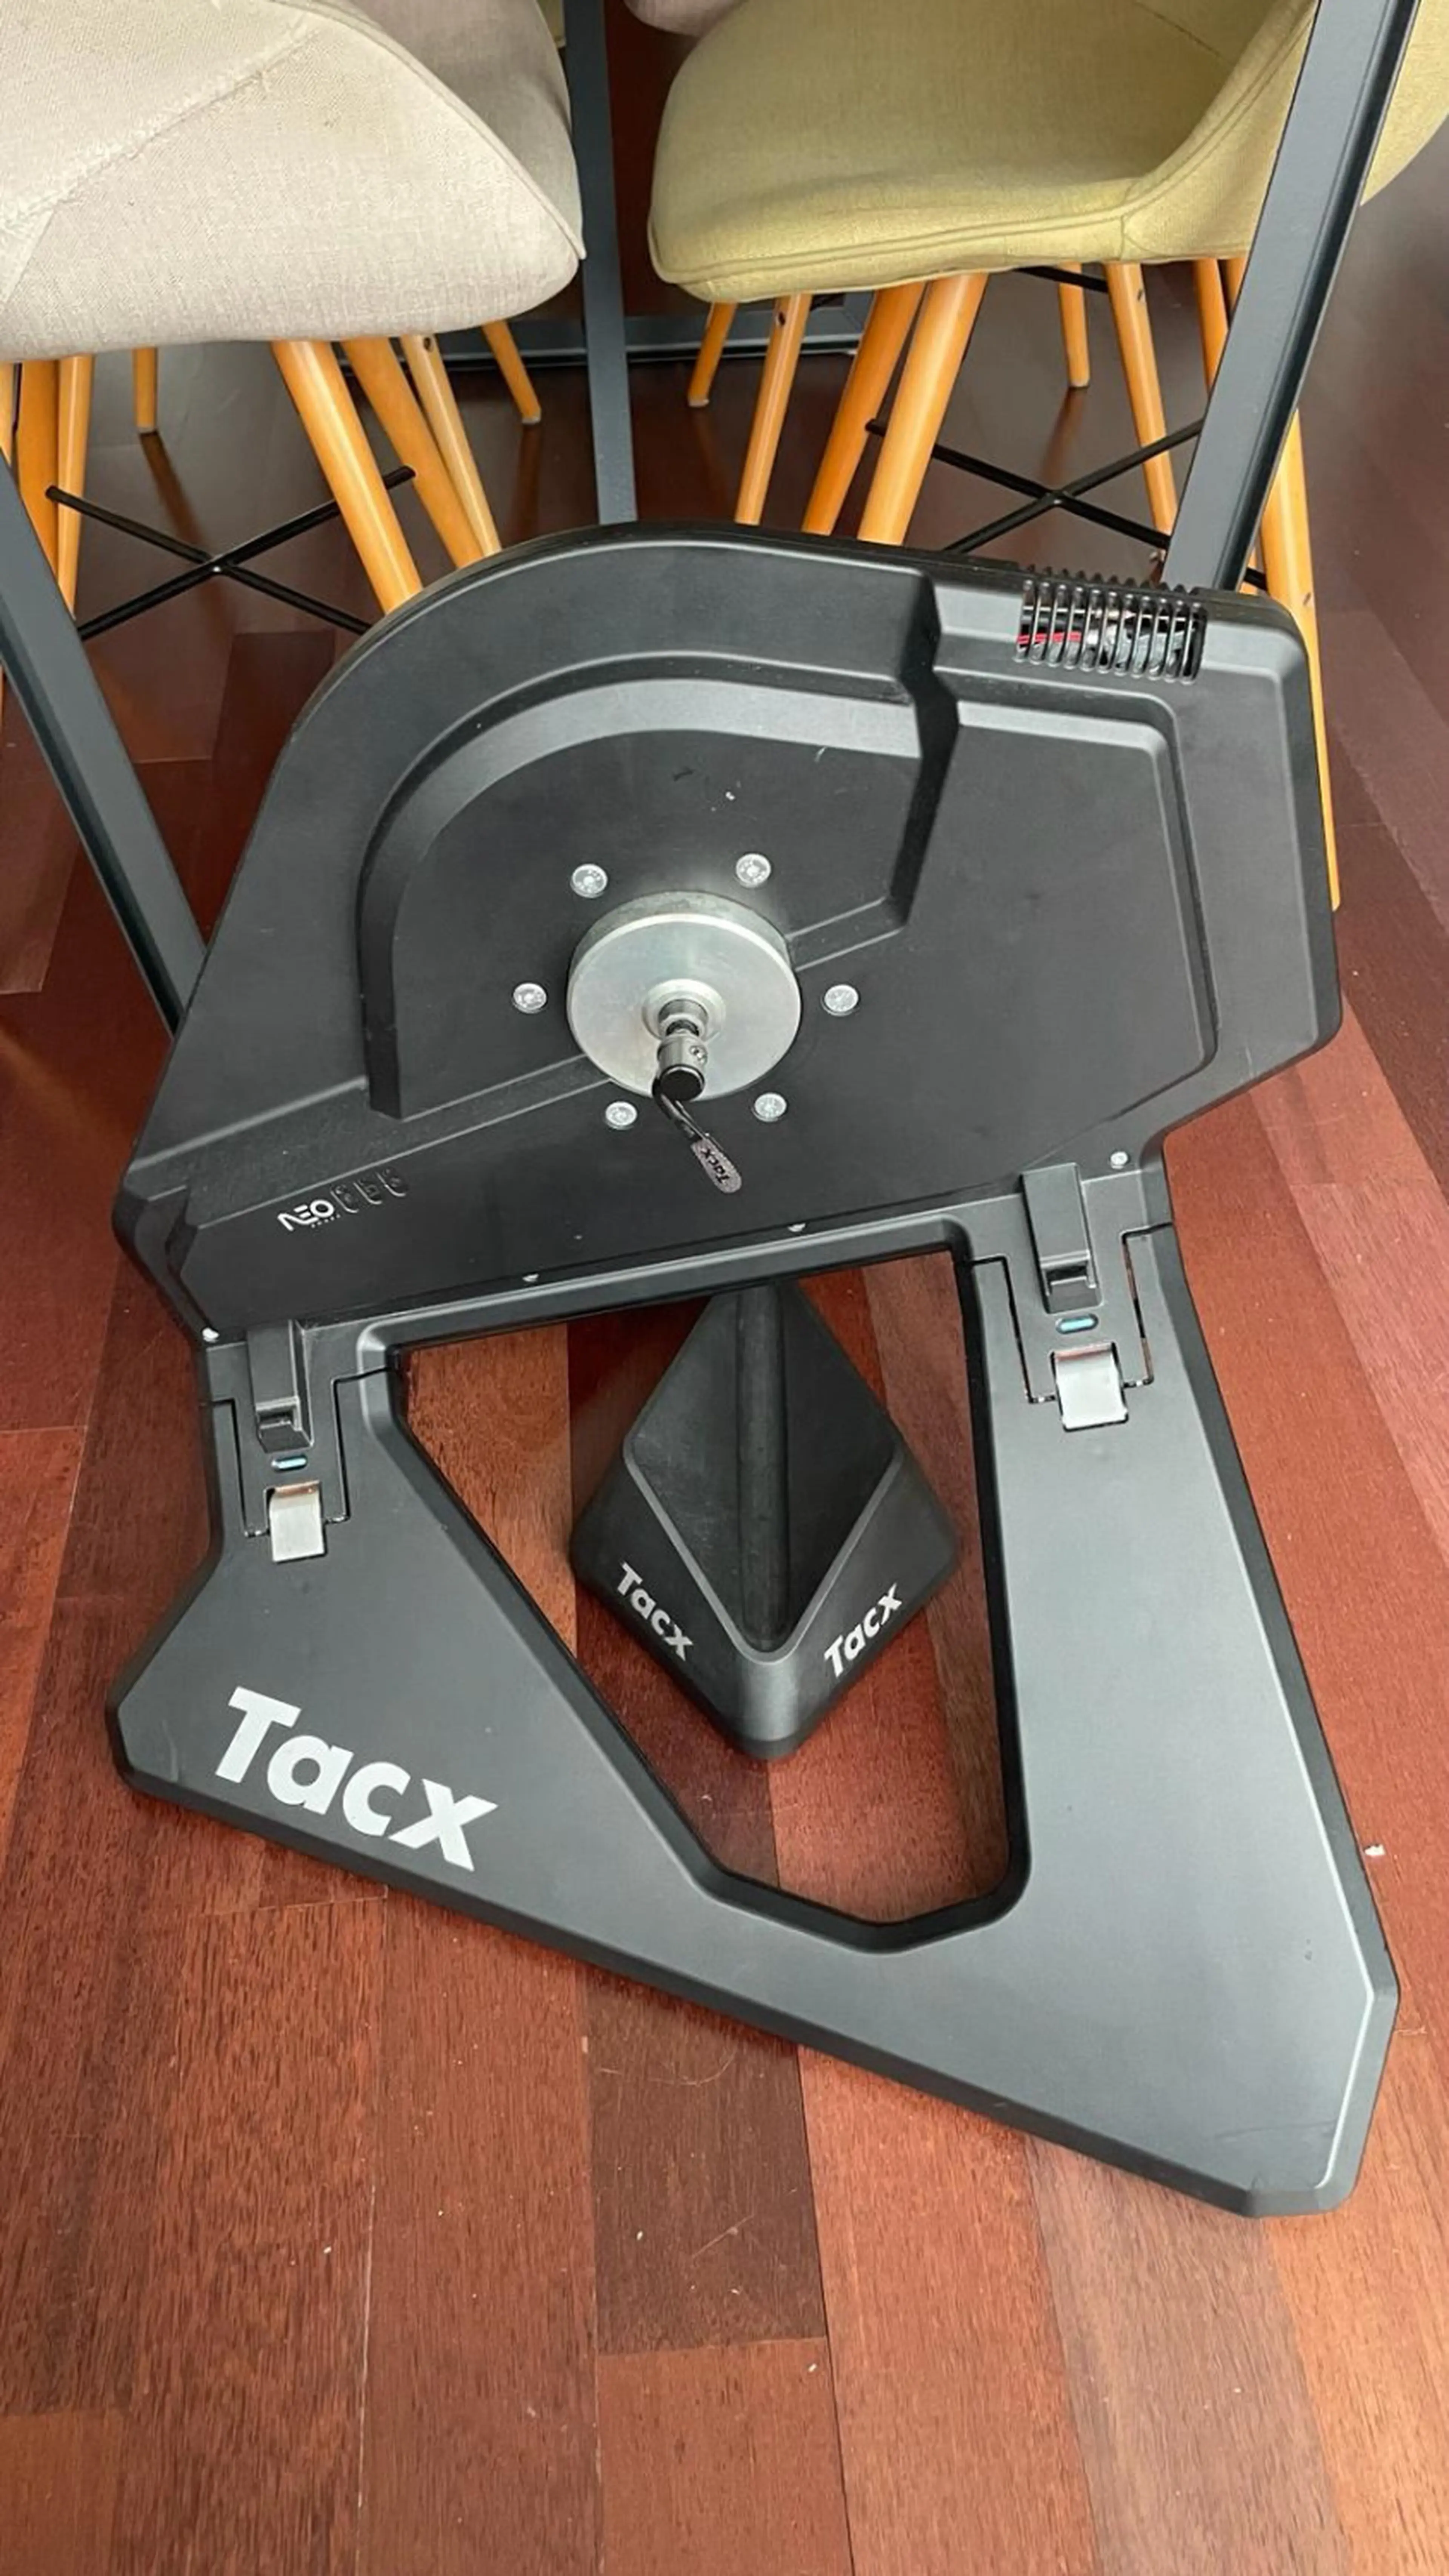 5. Trainer smart Tacx Neo T2800